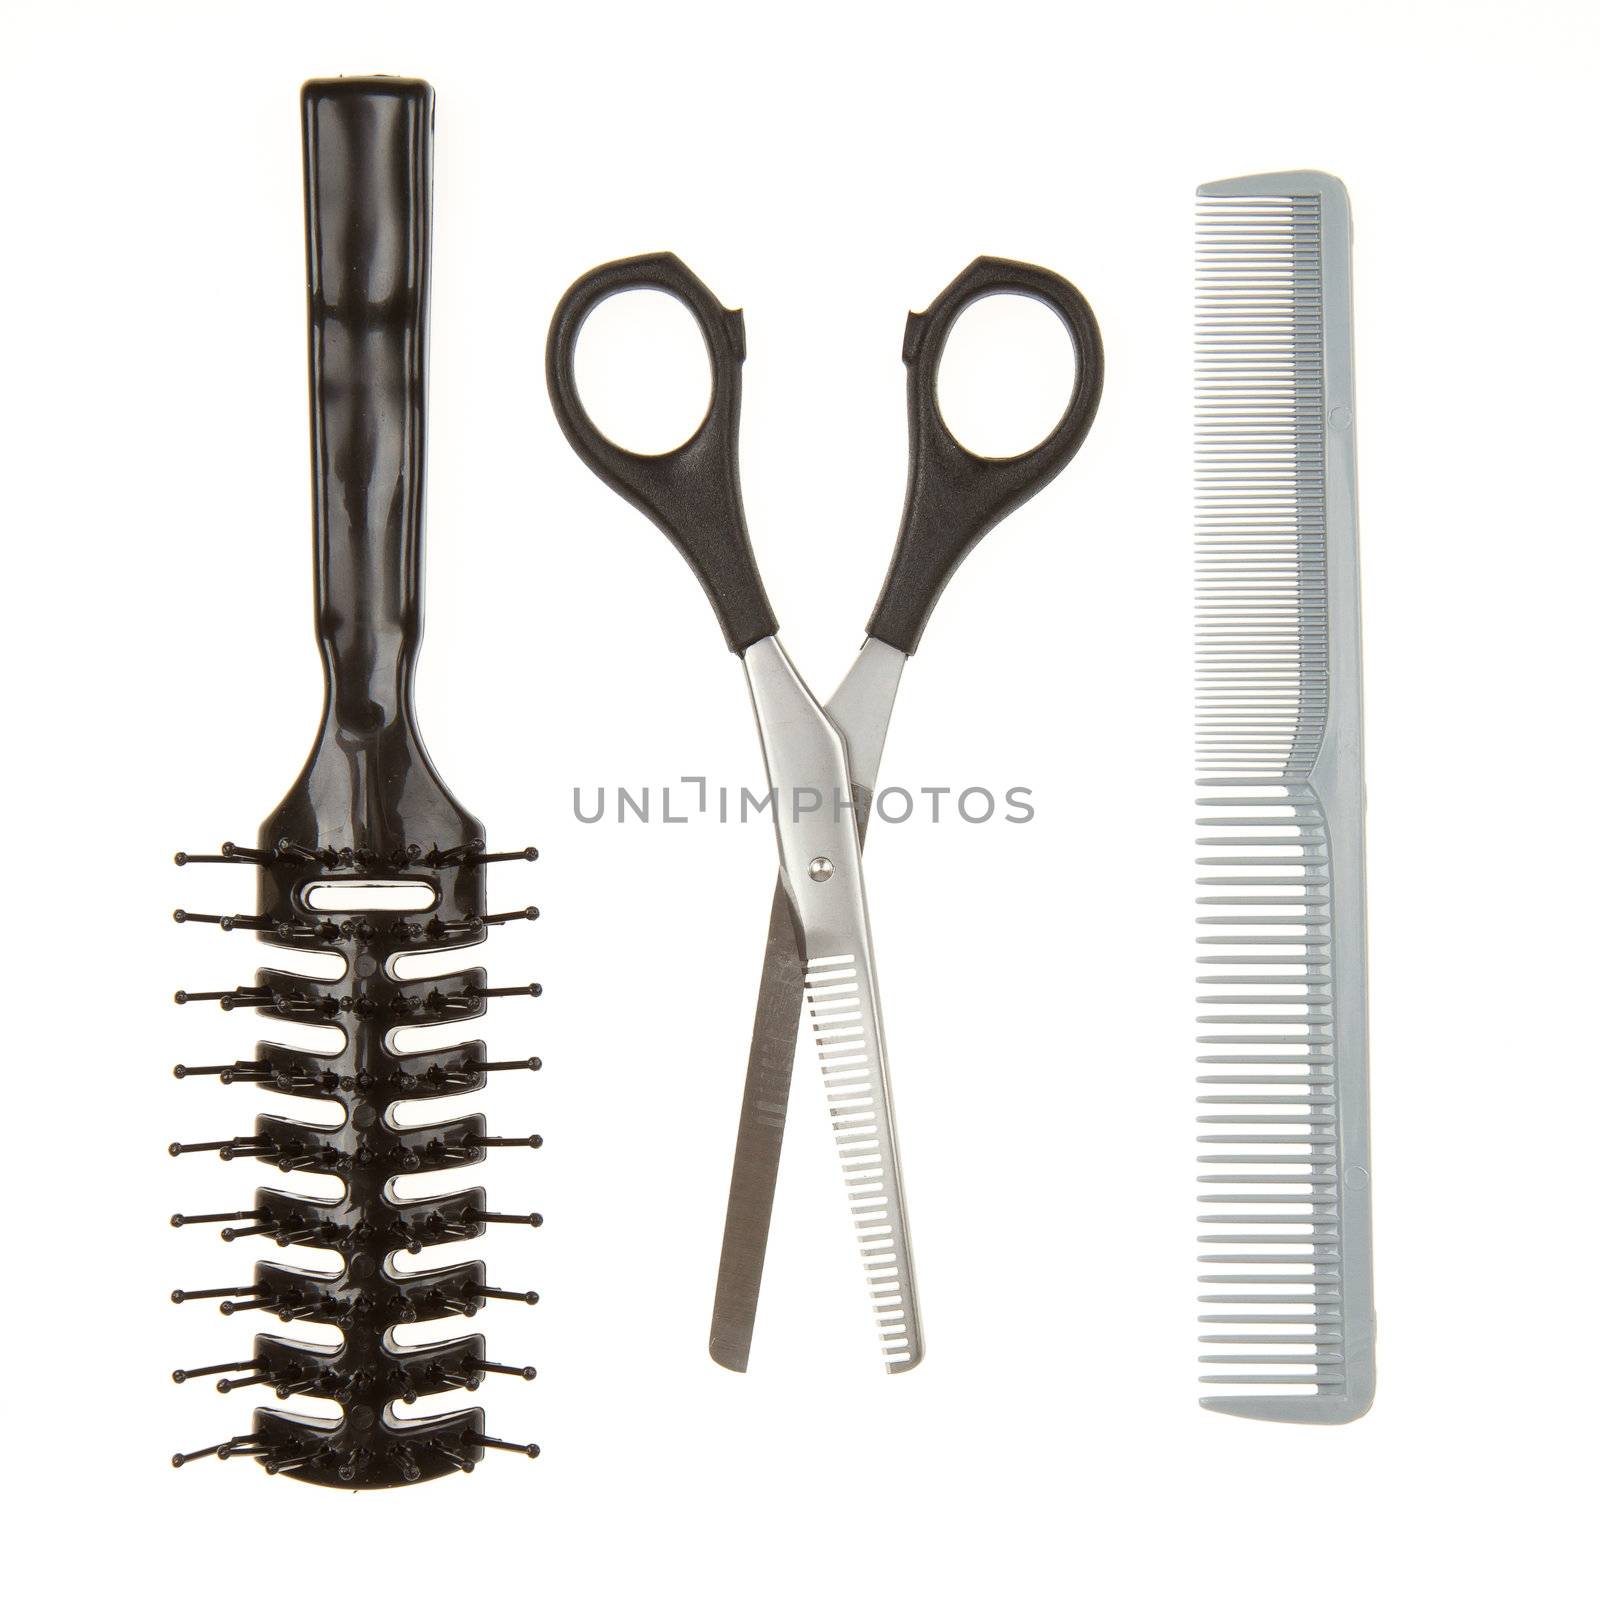 Cutting scissors or shears and black comb and a black brush by michaklootwijk